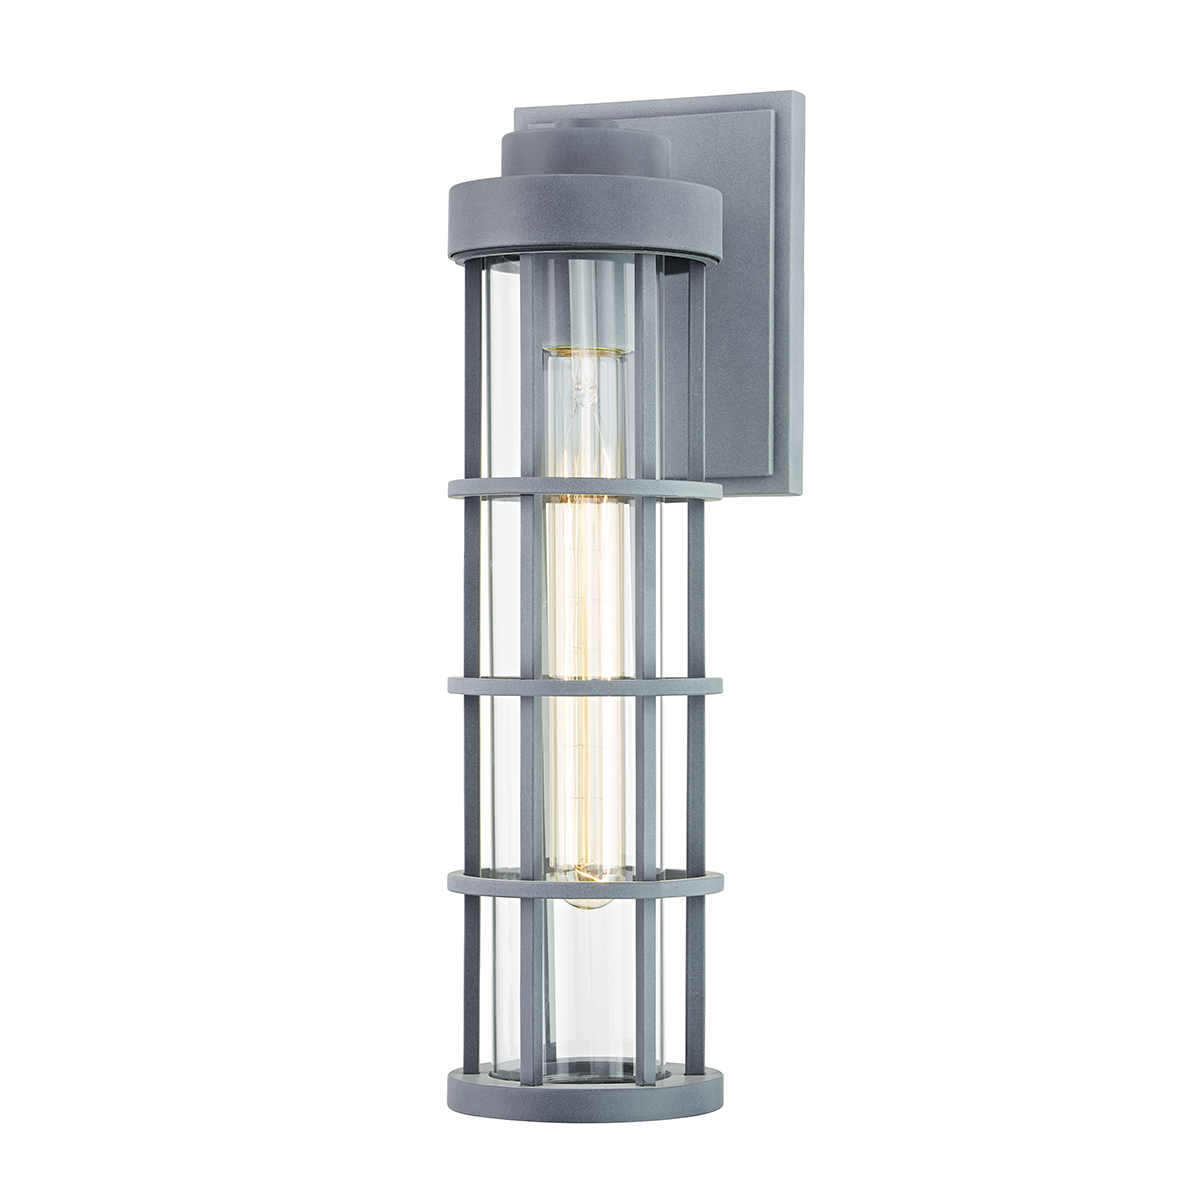 Troy MESA 1 LIGHT LARGE EXTERIOR WALL SCONCE B2042 Outdoor l Wall Troy Lighting WEATHERED ZINC  